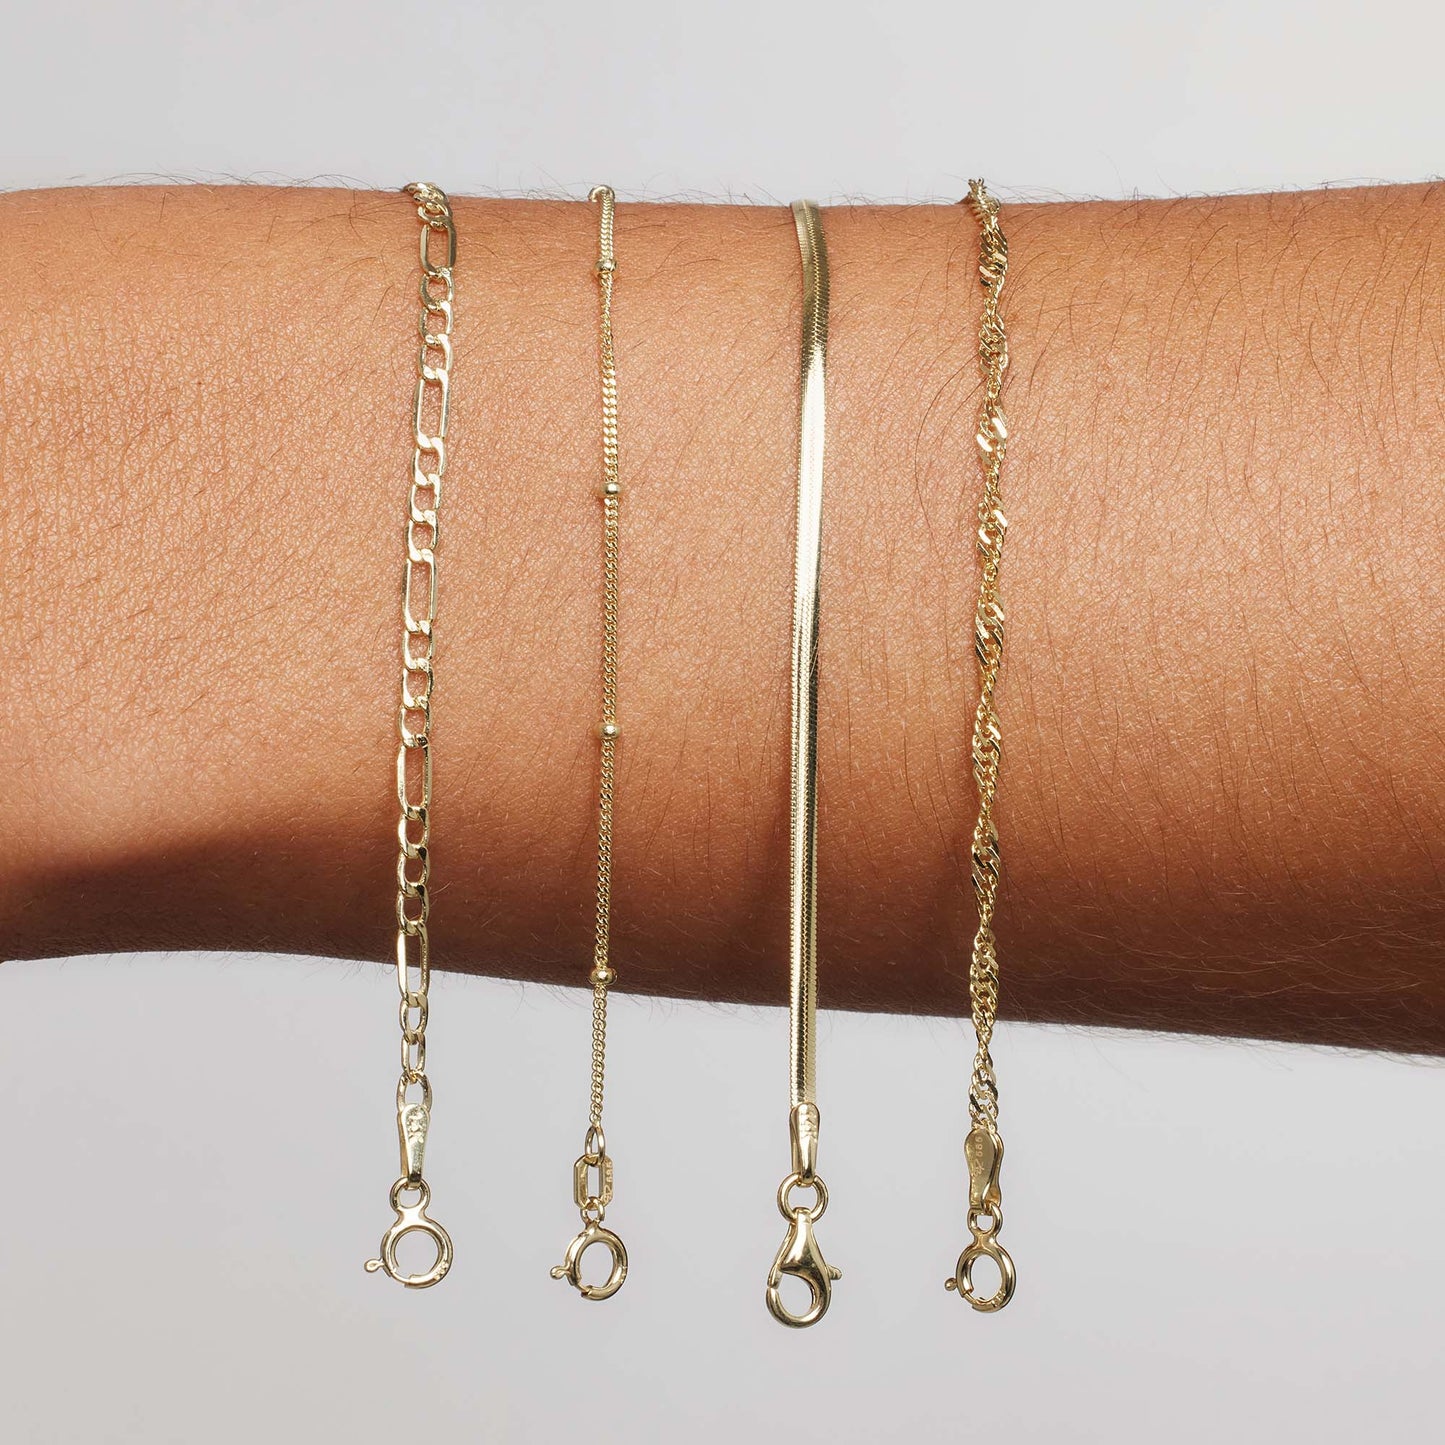 Dotted Chain Bracelet